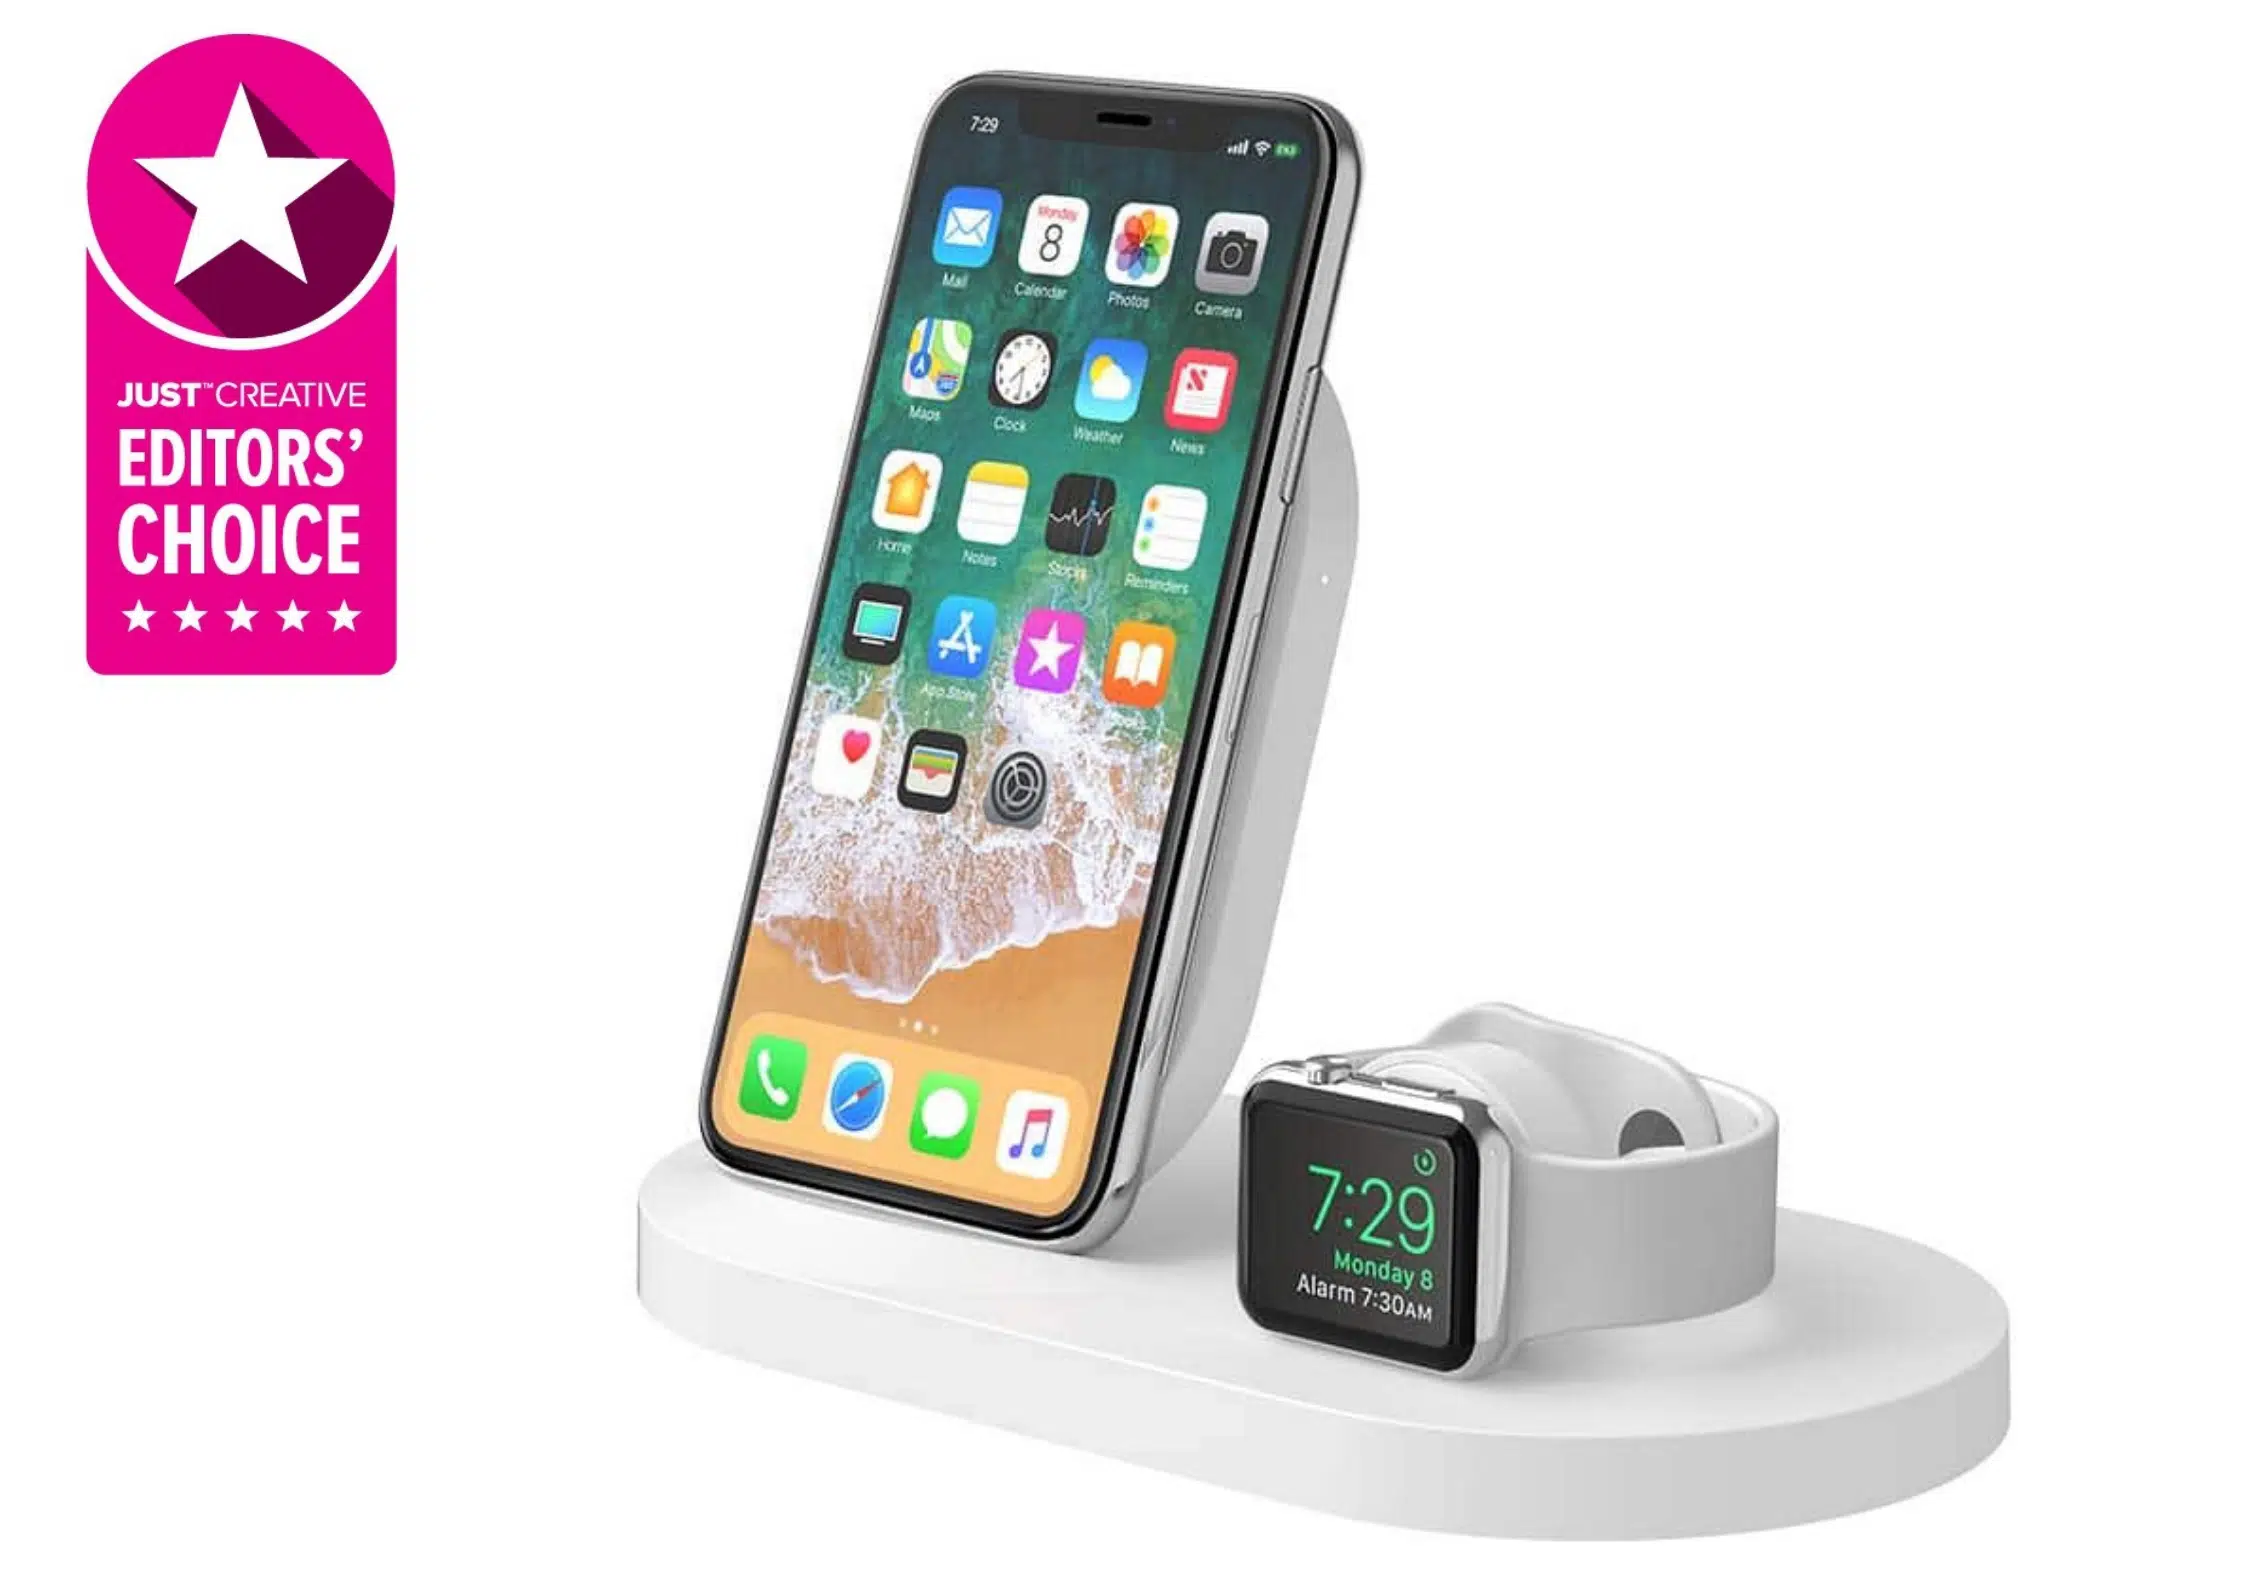 Belkin Wireless Charging Dock - Best dock for iPhone and Apple watch owners